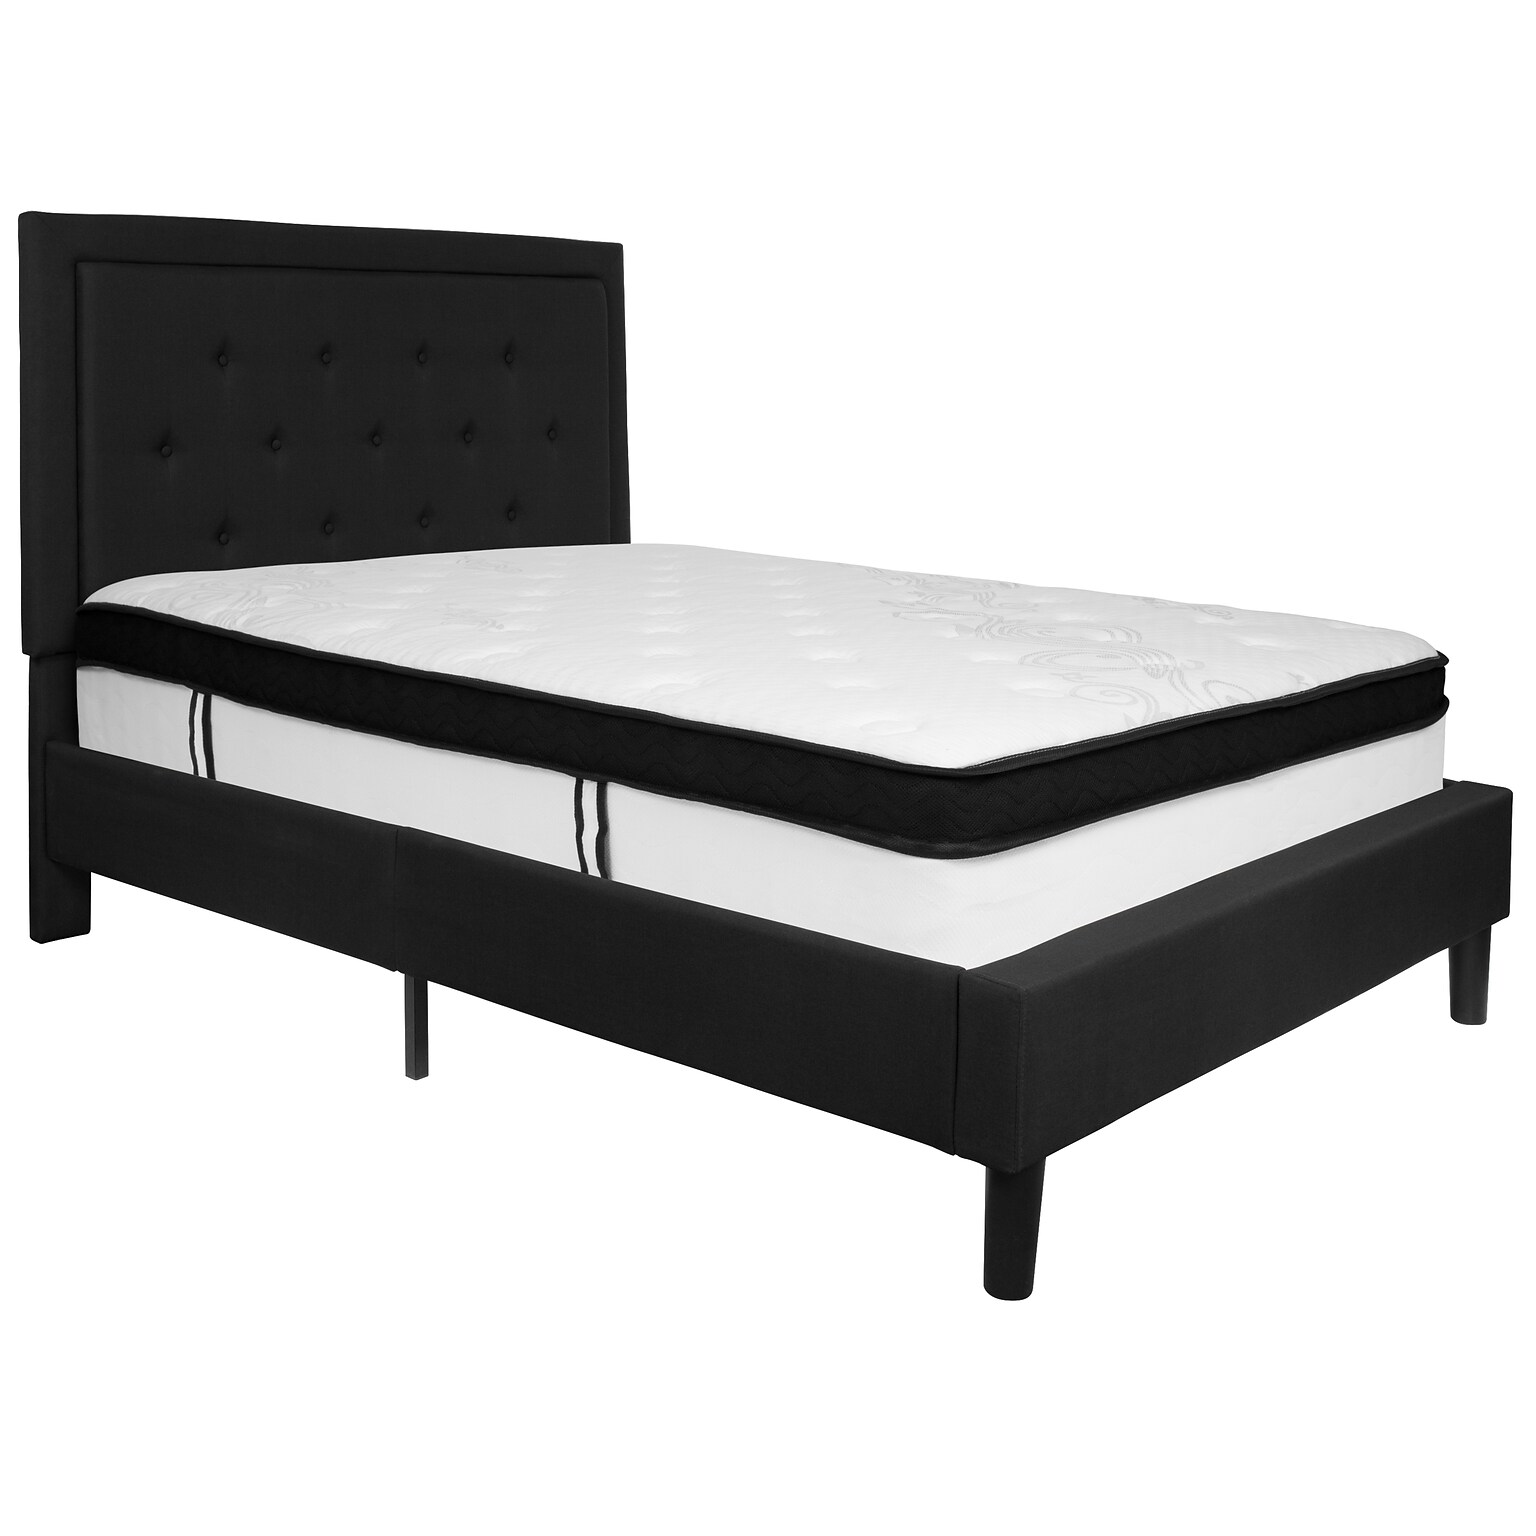 Flash Furniture Roxbury Tufted Upholstered Platform Bed in Black Fabric with Memory Foam Mattress, Full (SLBMF22)